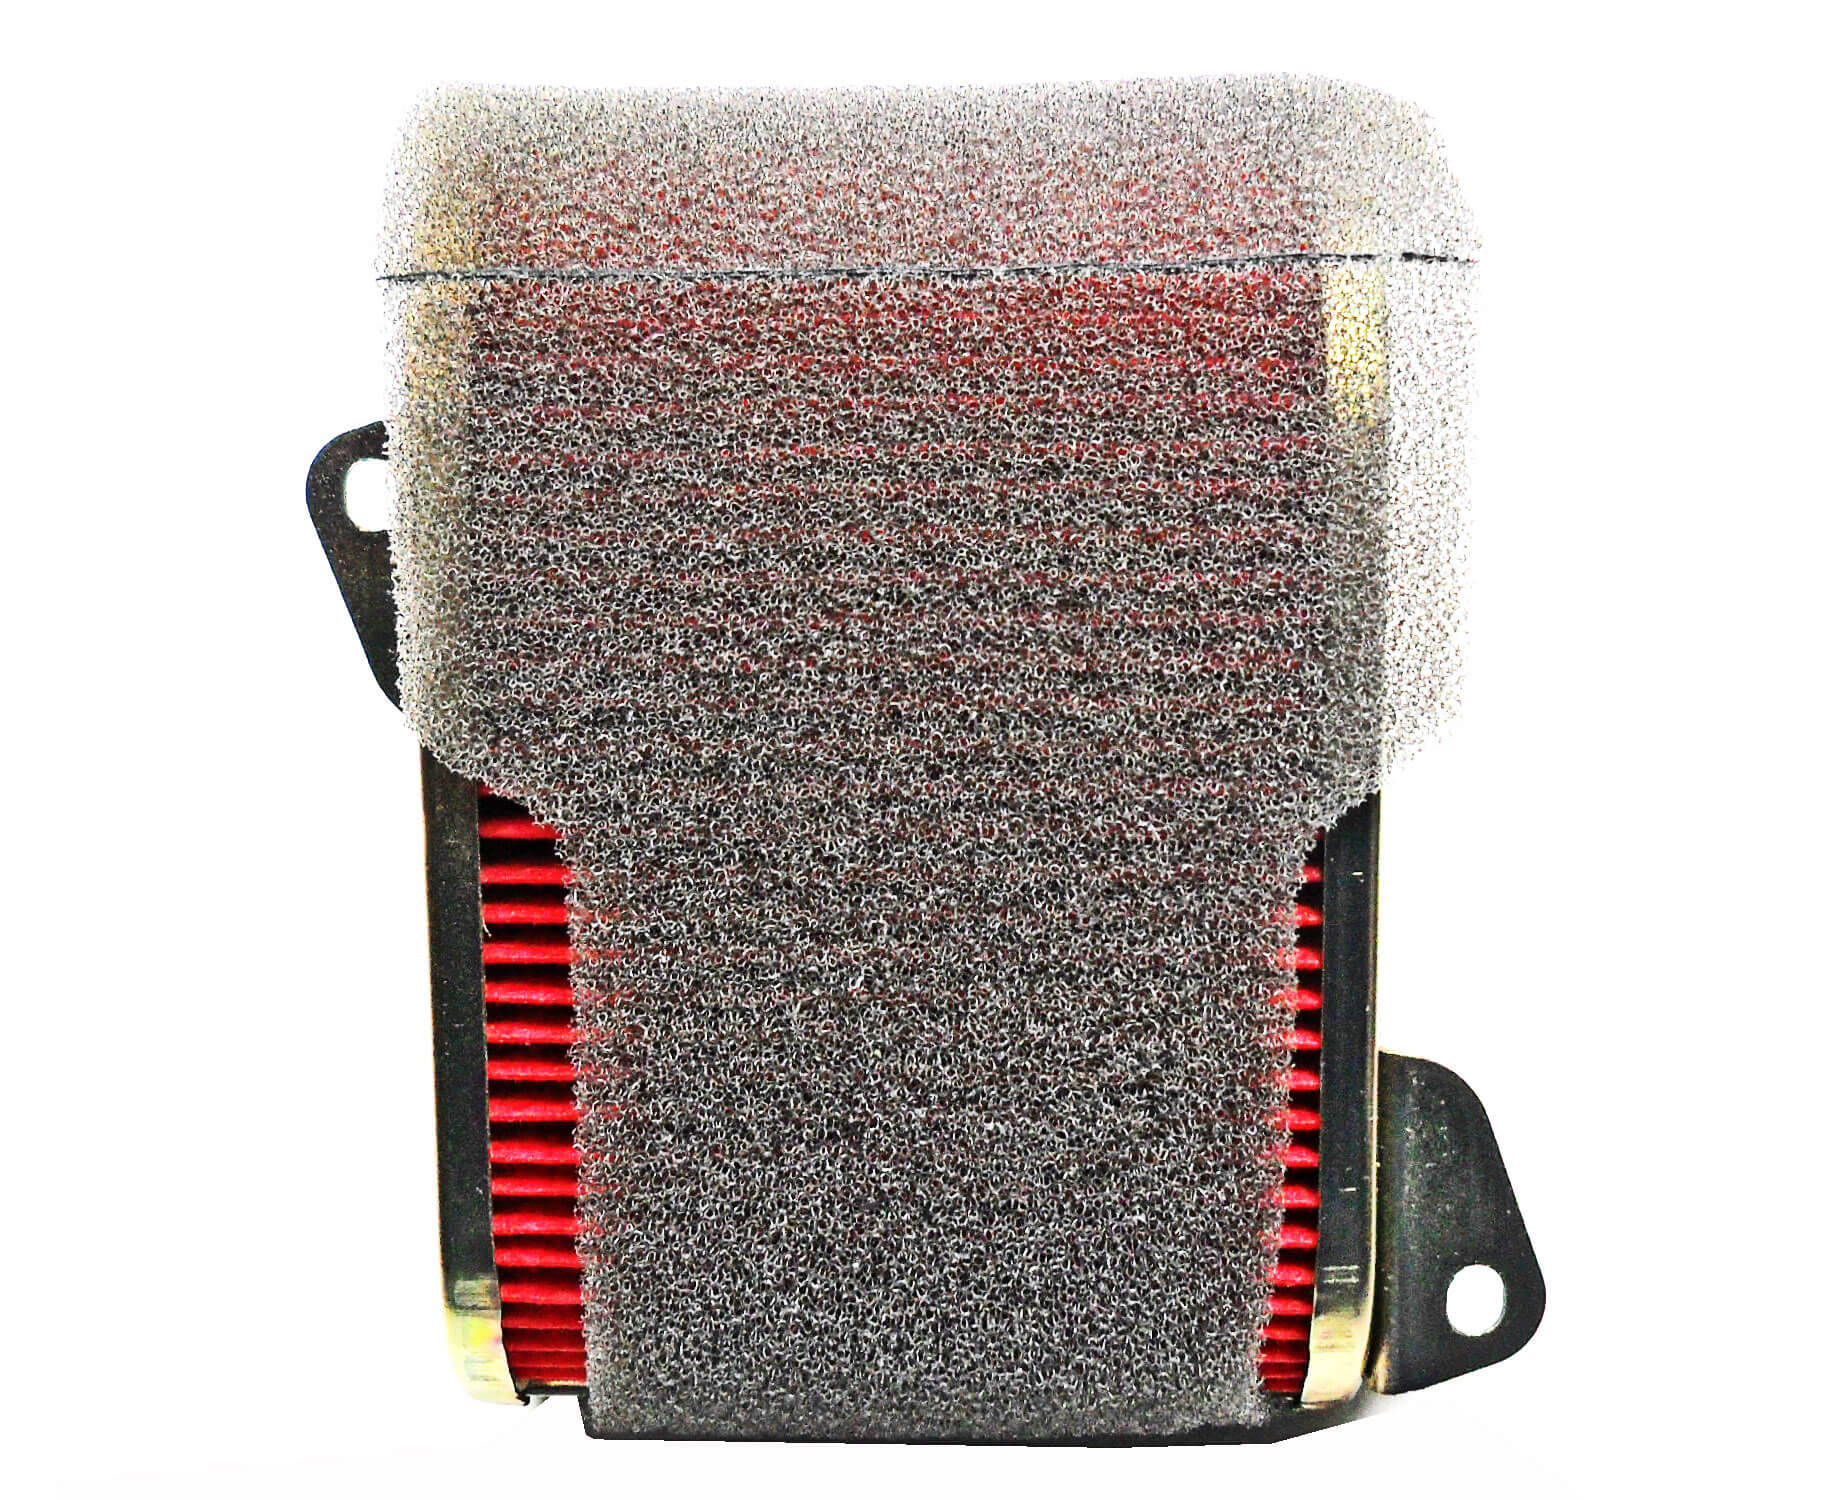 Air Filter Element 4 Stroke GY6-125, GY6-150 ATVs, GoKarts, Scooters, + E-Ton Sport 150 & Tomos Nitro 150cc Scooters